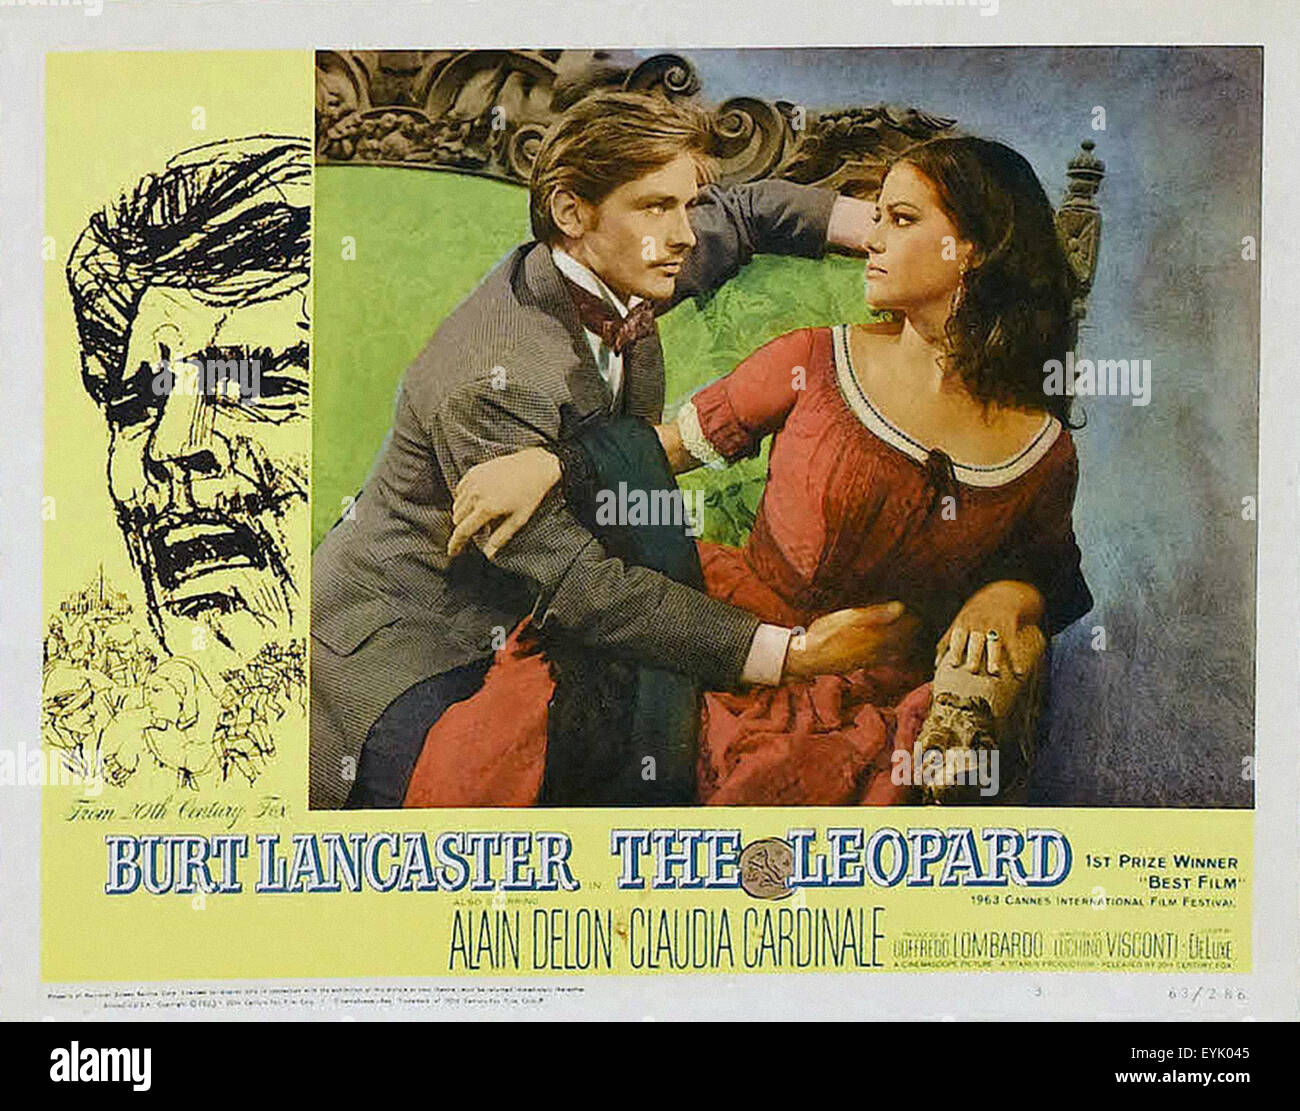 The Leopard - Movie Poster Stock Photo